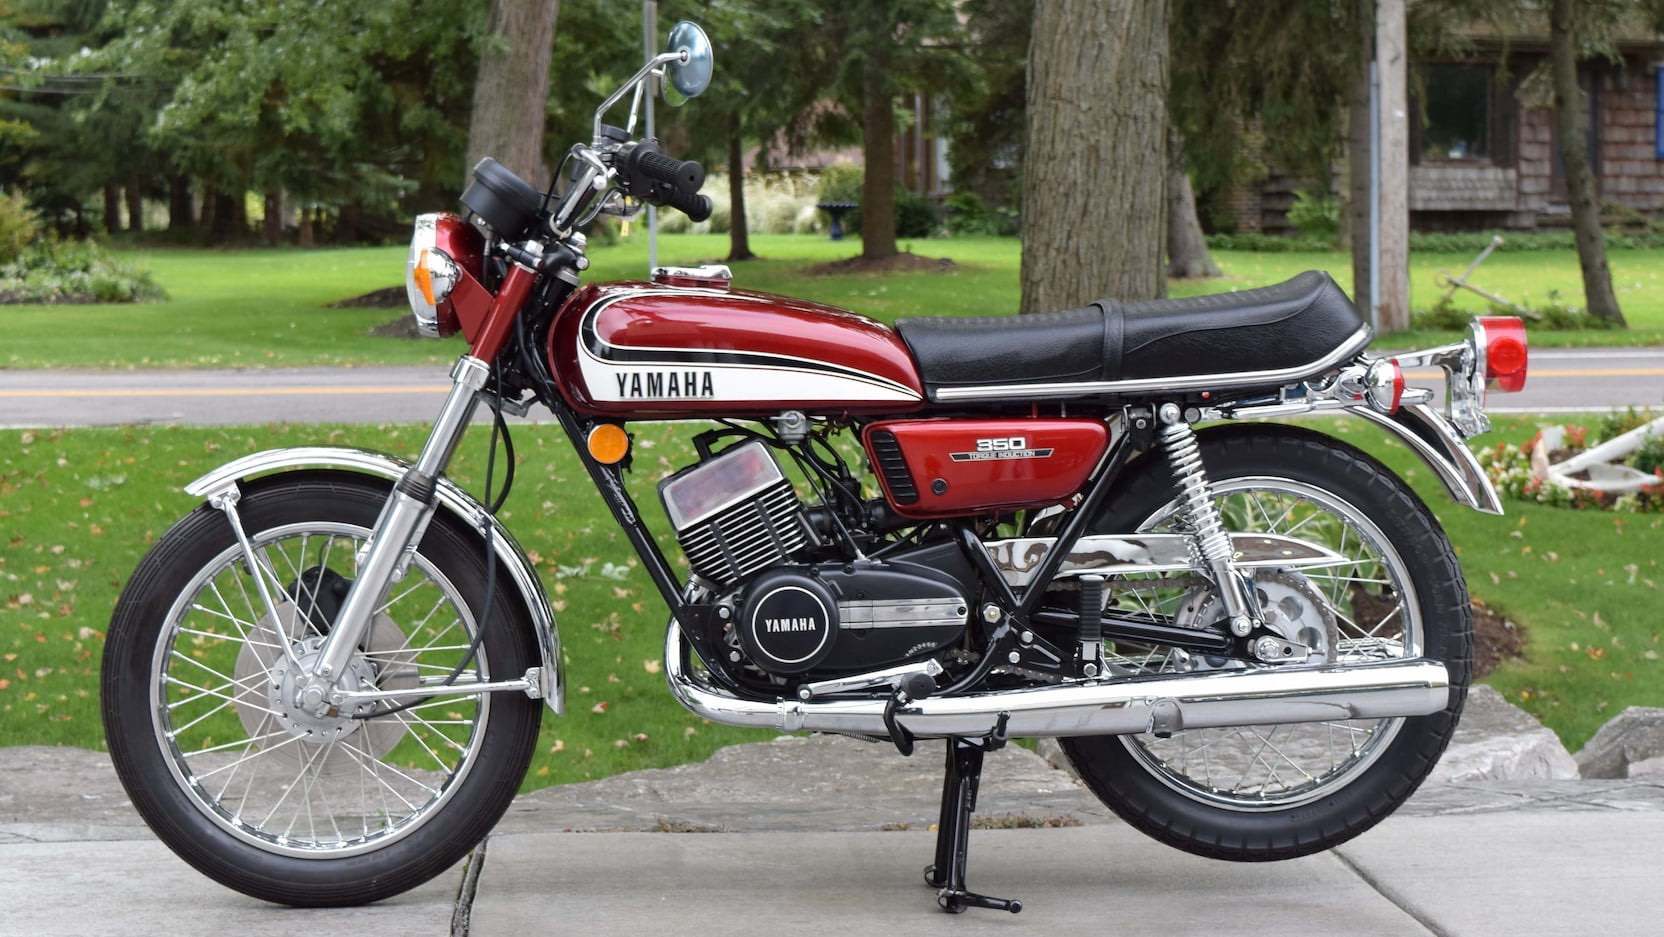 An early 1970s Yamaha RD350 Motorcycle